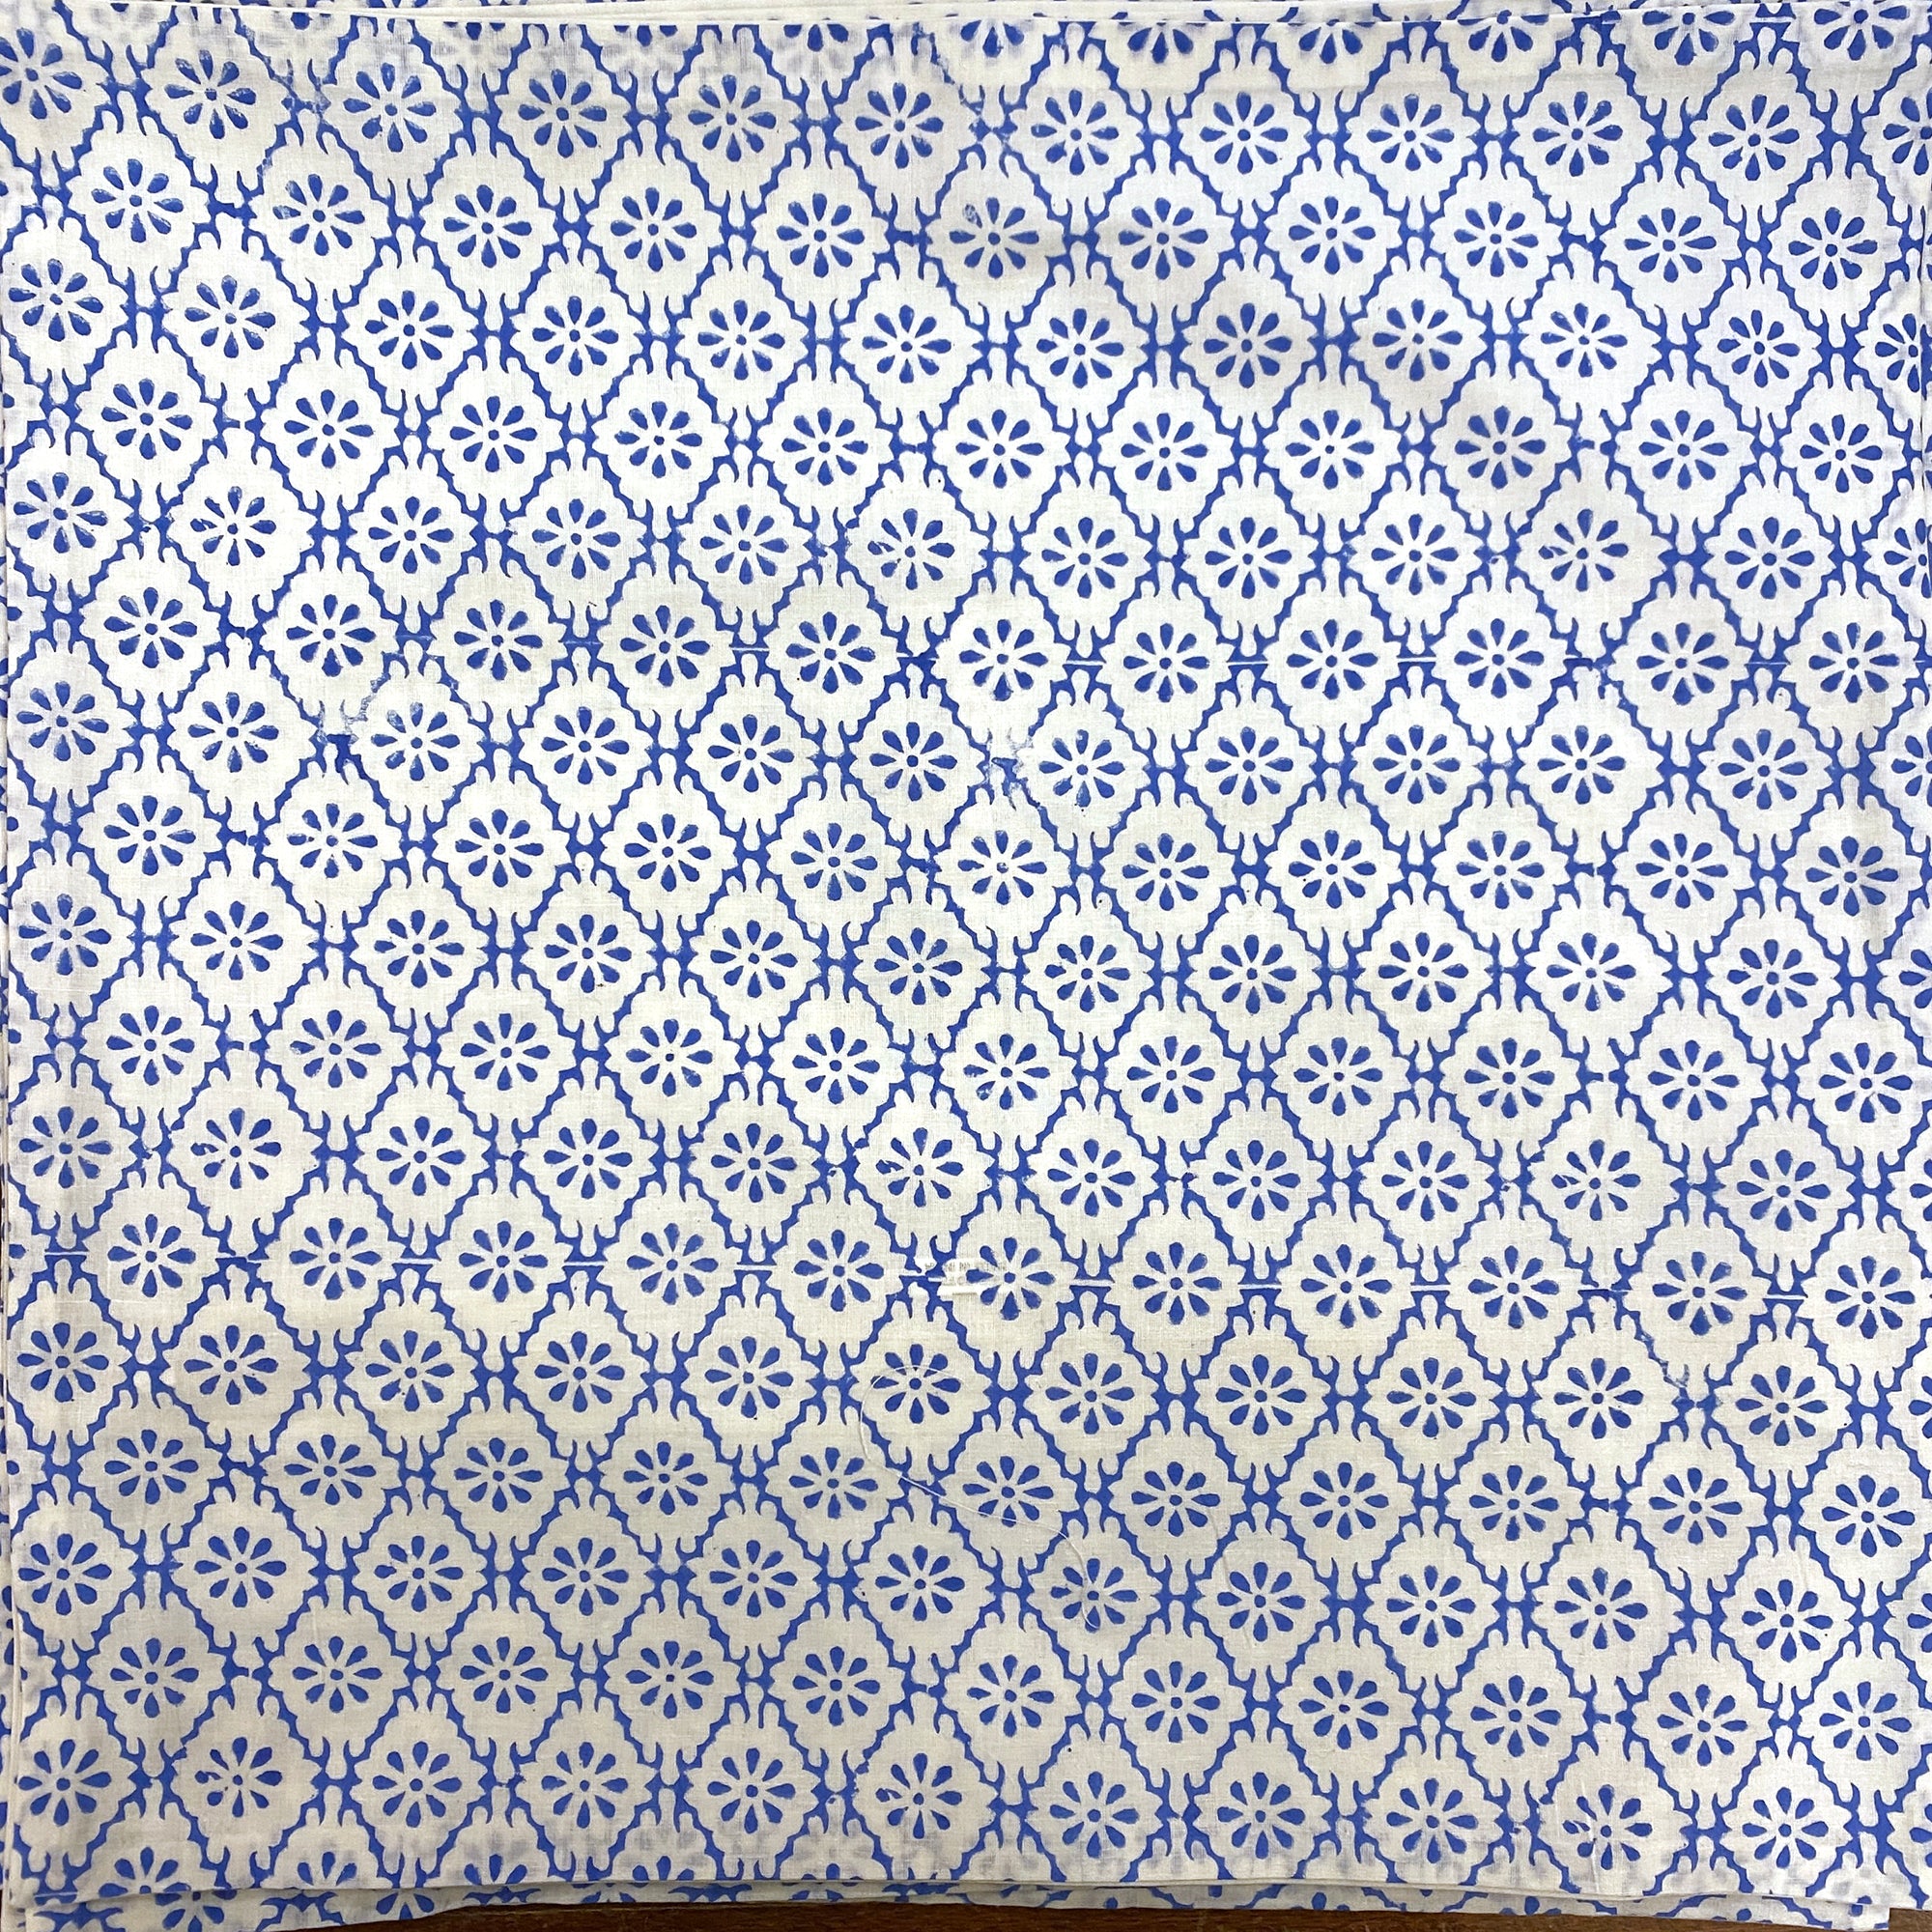 18 in. Blue & White Block Print Pillowcover - Vintage India NYC